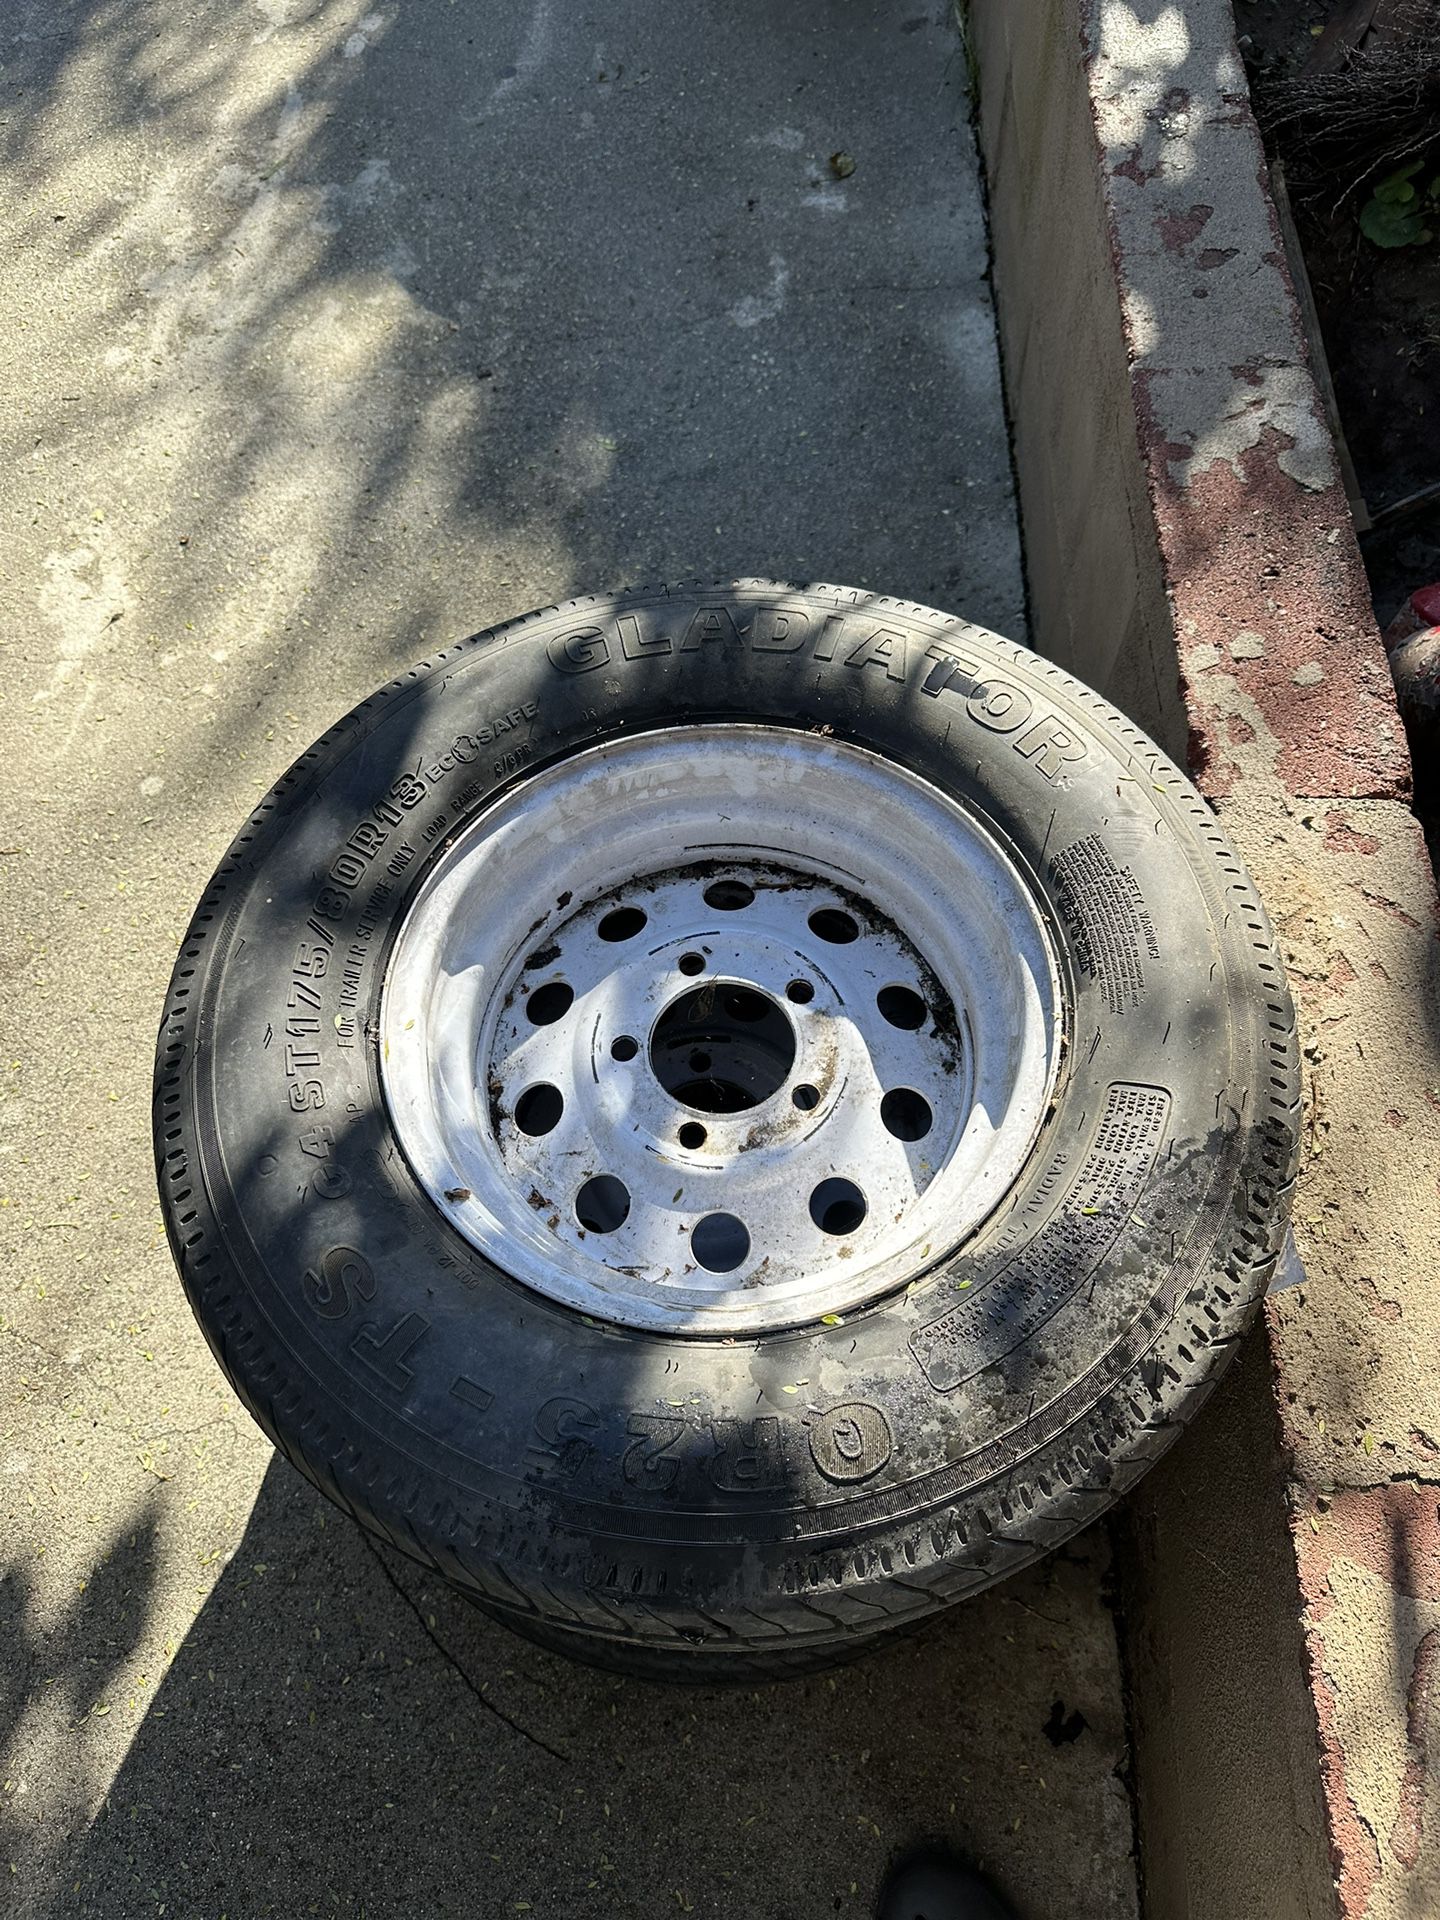 Trailer Rims 13” 3 Of Them One Tire Is Brand New 